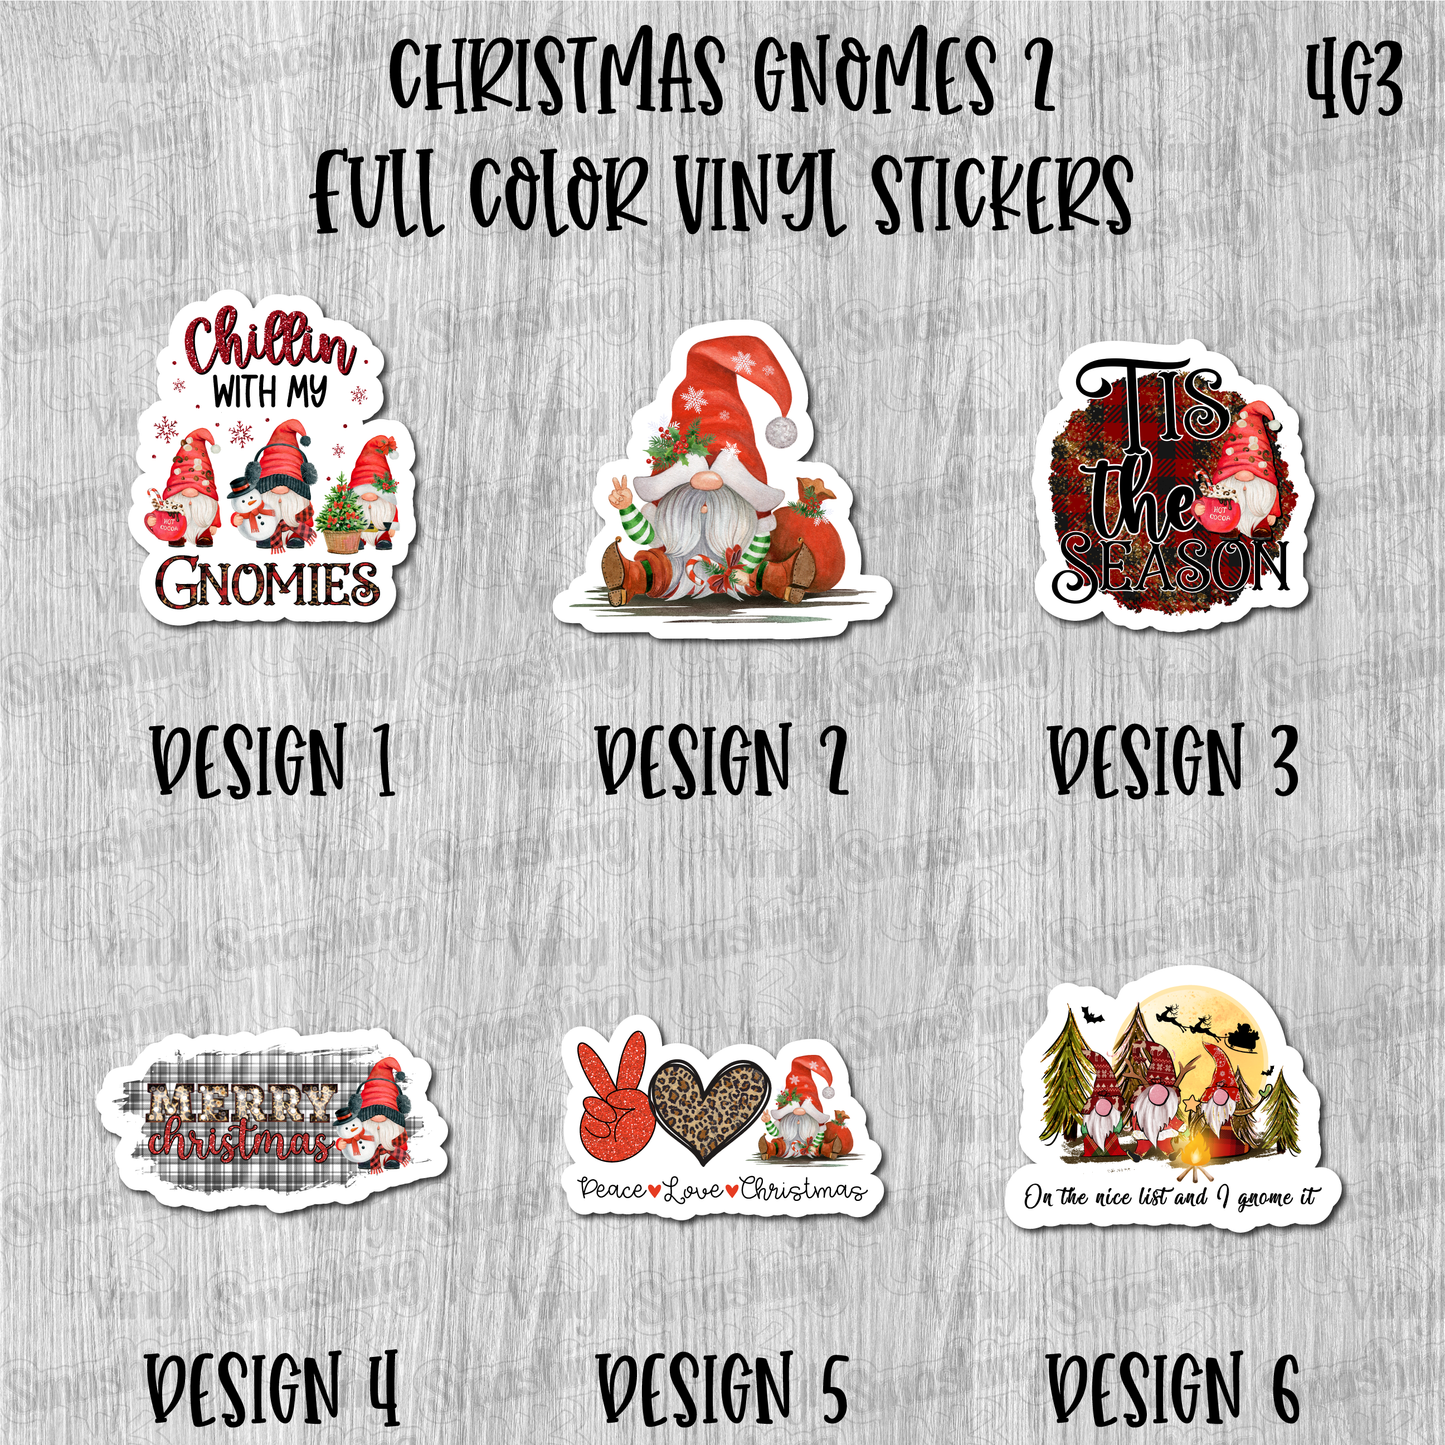 Christmas Gnomes 2 - Full Color Vinyl Stickers (SHIPS IN 3-7 BUS DAYS)